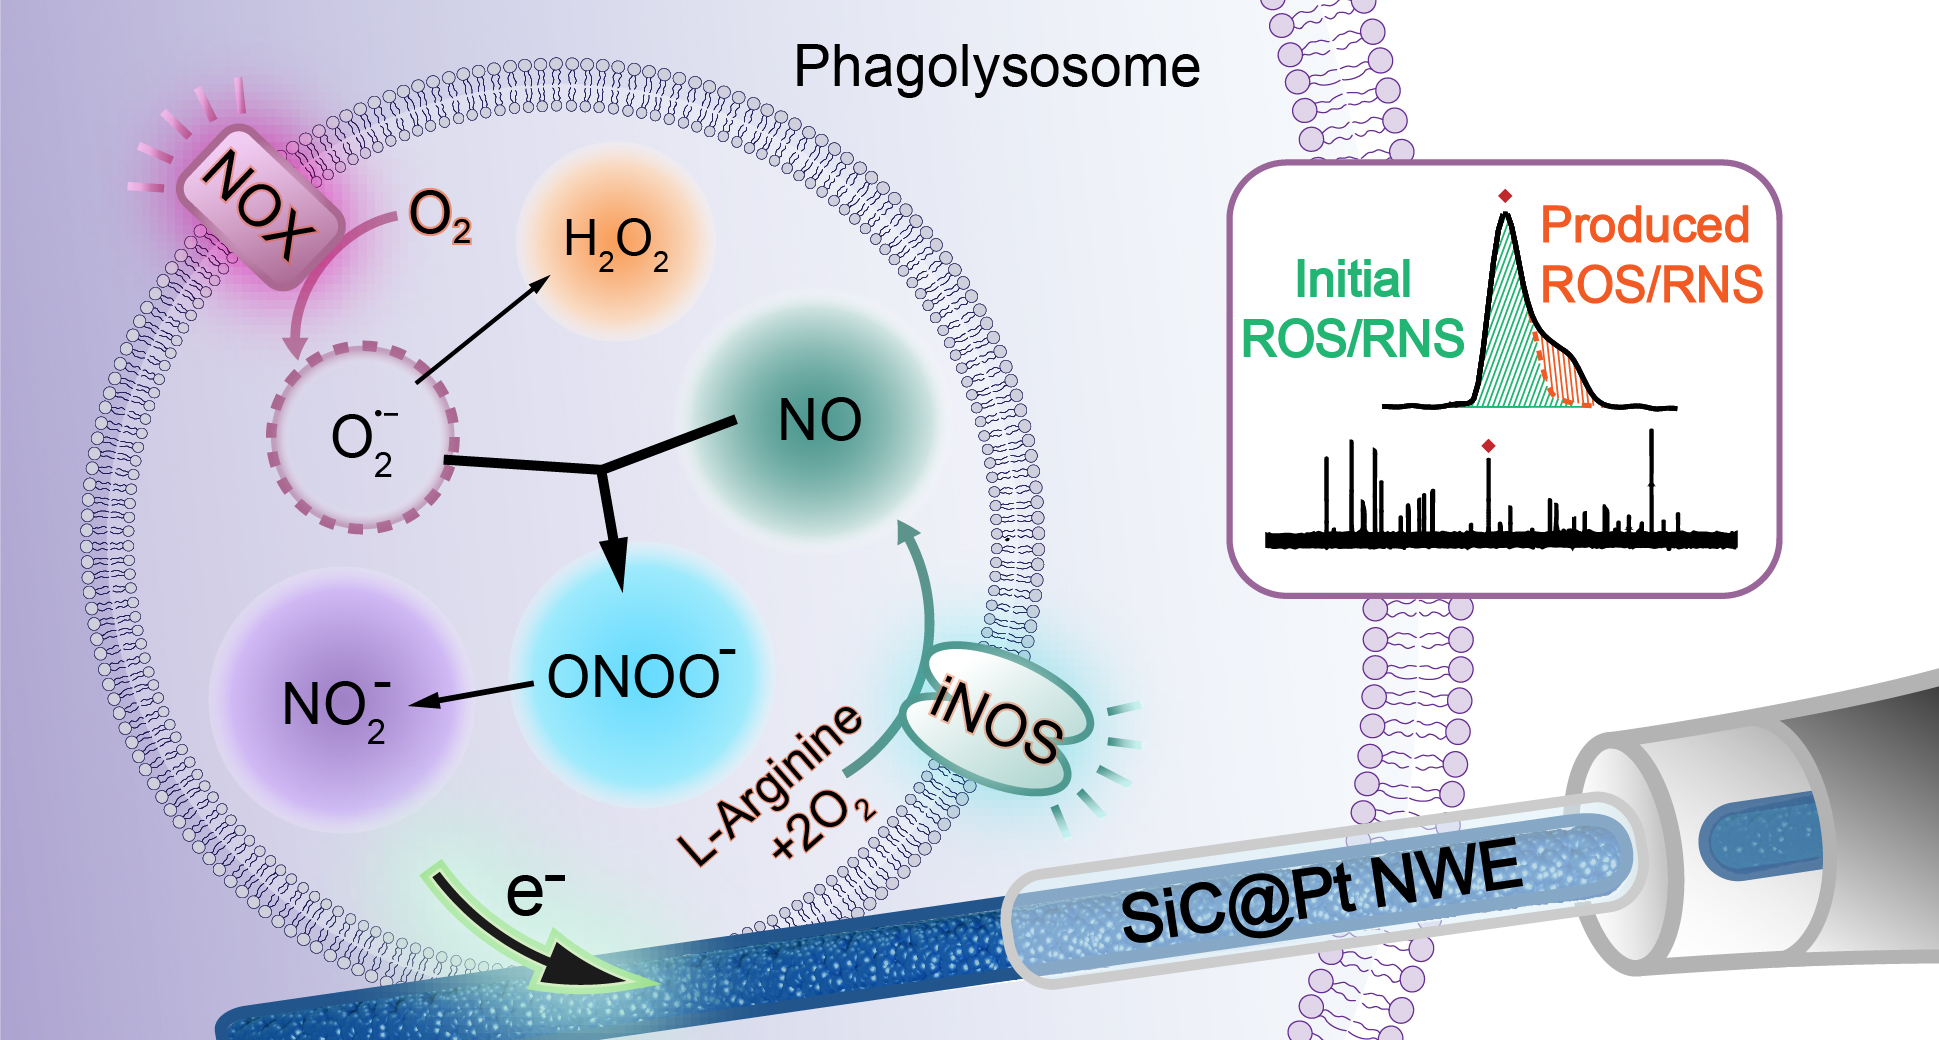 <a href='http://huanglab.whu.edu.cn/info/1032/1642.htm' target='_blank'><h4>Homeostasis inside Single Activated Phagolysosomes: Quantitative and Selective Measurements of Submillisecond Dynamics of Reactive Oxygen and Nitrogen Species Production with a Nanoelectrochemical Sensor</h4> <p>ABSTRACT: Reactive oxygen and nitrogen species (ROS/RNS) are generated by macrophages inside their phagolysosomes. This production is essential for phagocytosis of damaged cells and pathogens, i.e., protecting the organism and maintaining immune homeostasis. The ability to quantitatively and individually monitor the four primary ROS/RNS (ONOO–, H2O2, NO, and NO2–) with submillisecond resolution is clearly warranted to elucidate the still unclear mechanisms of their rapid generation and to track their concentration variations over time inside phagolysosomes, in particular, to document the origin of ROS/RNS homeostasis during phagocytosis. A novel nanowire electrode has been specifically developed for this purpose. It consisted of wrapping a SiC nanowire with a mat of 3 nm platinum nanoparticles whose high electrocatalytic performances allow the characterization and individual measurements of each of the four primary ROS/RNS.</p></a>